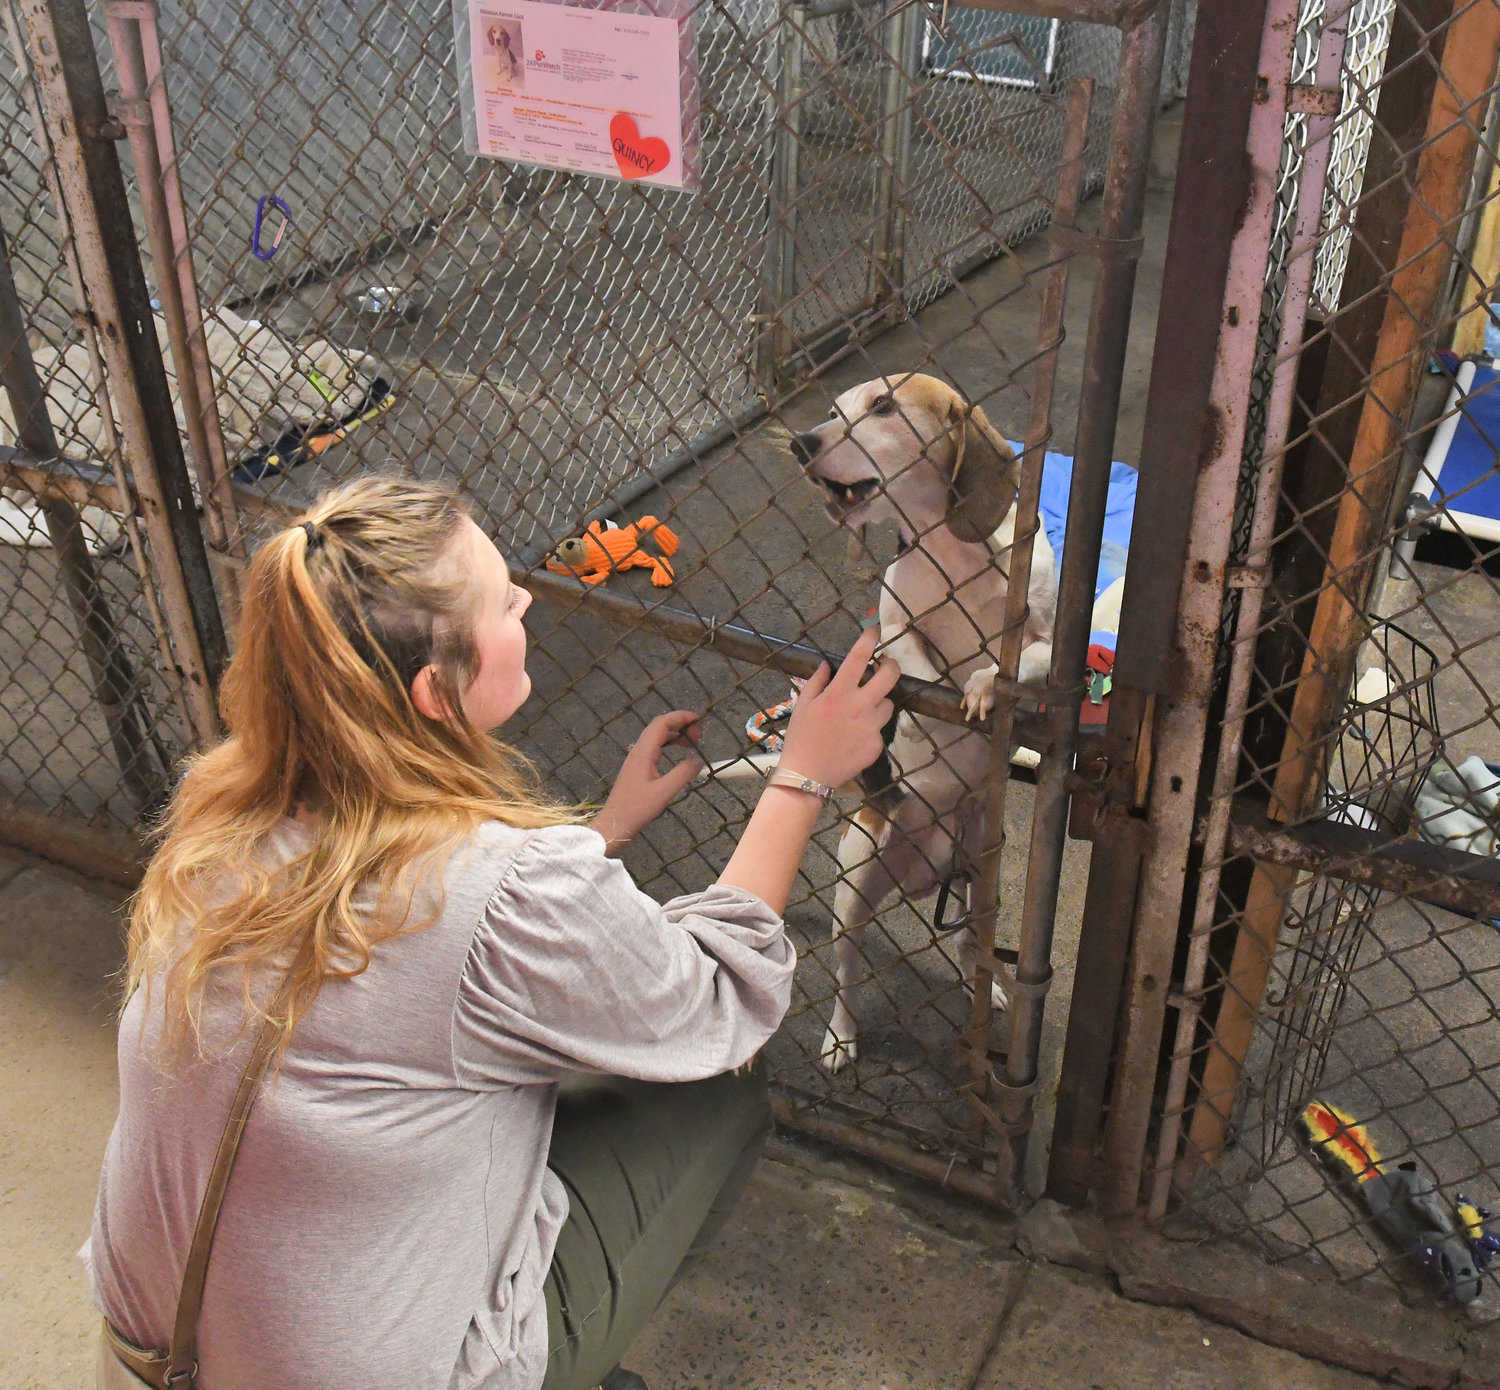 743 pets found a home in 2018 thanks to Humane Society of Rome | Daily  Sentinel